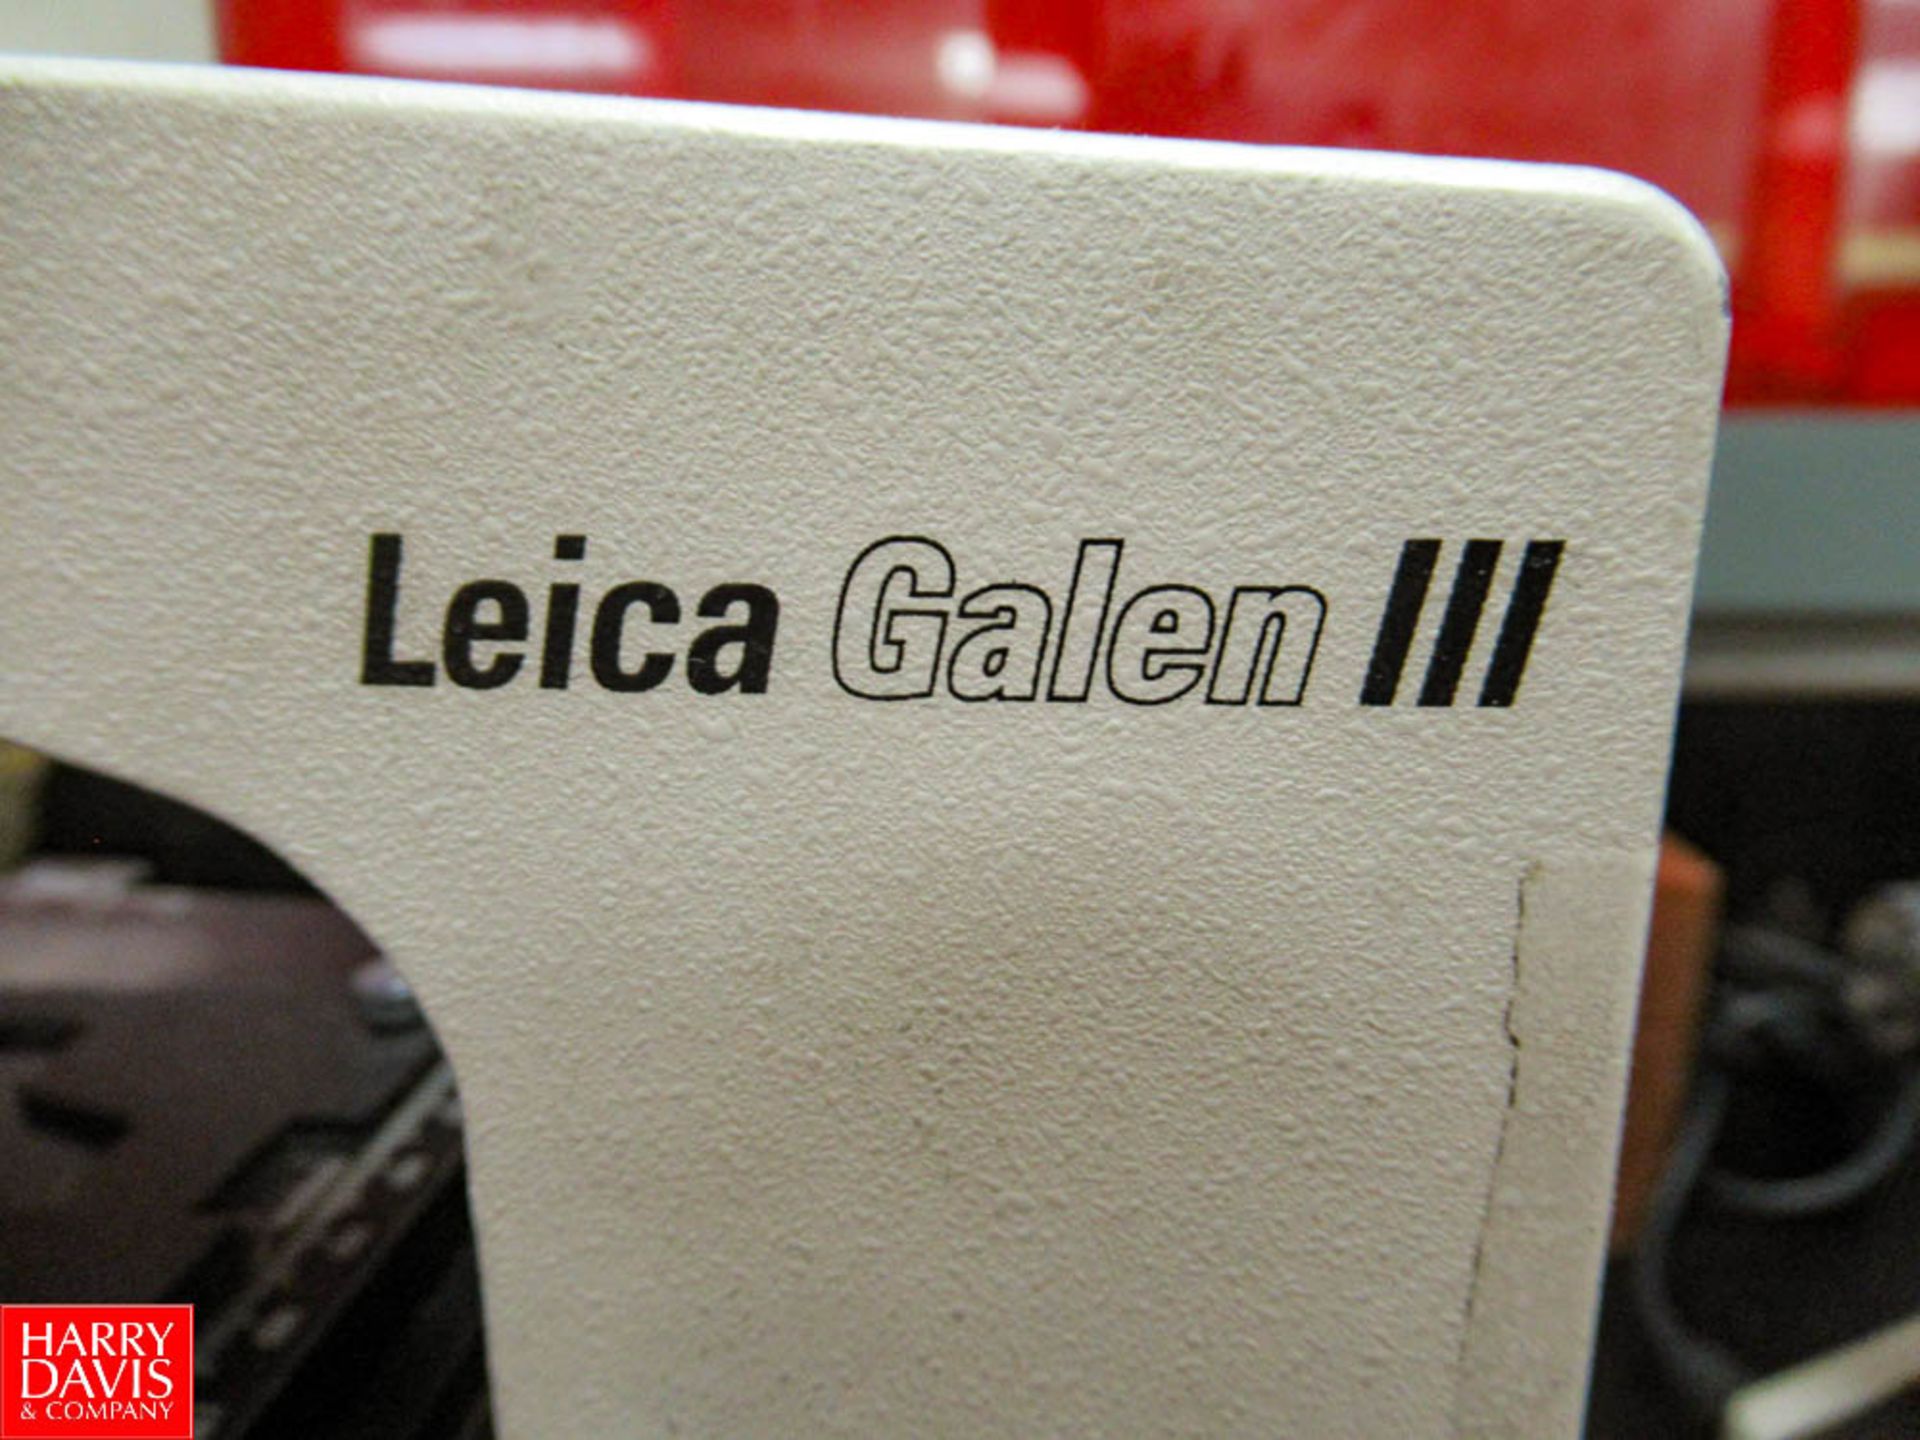 Leica Microscope, Model: Galen III, Located In: Milk Test Lab - Rigging Fee: $ 25 - Image 2 of 2